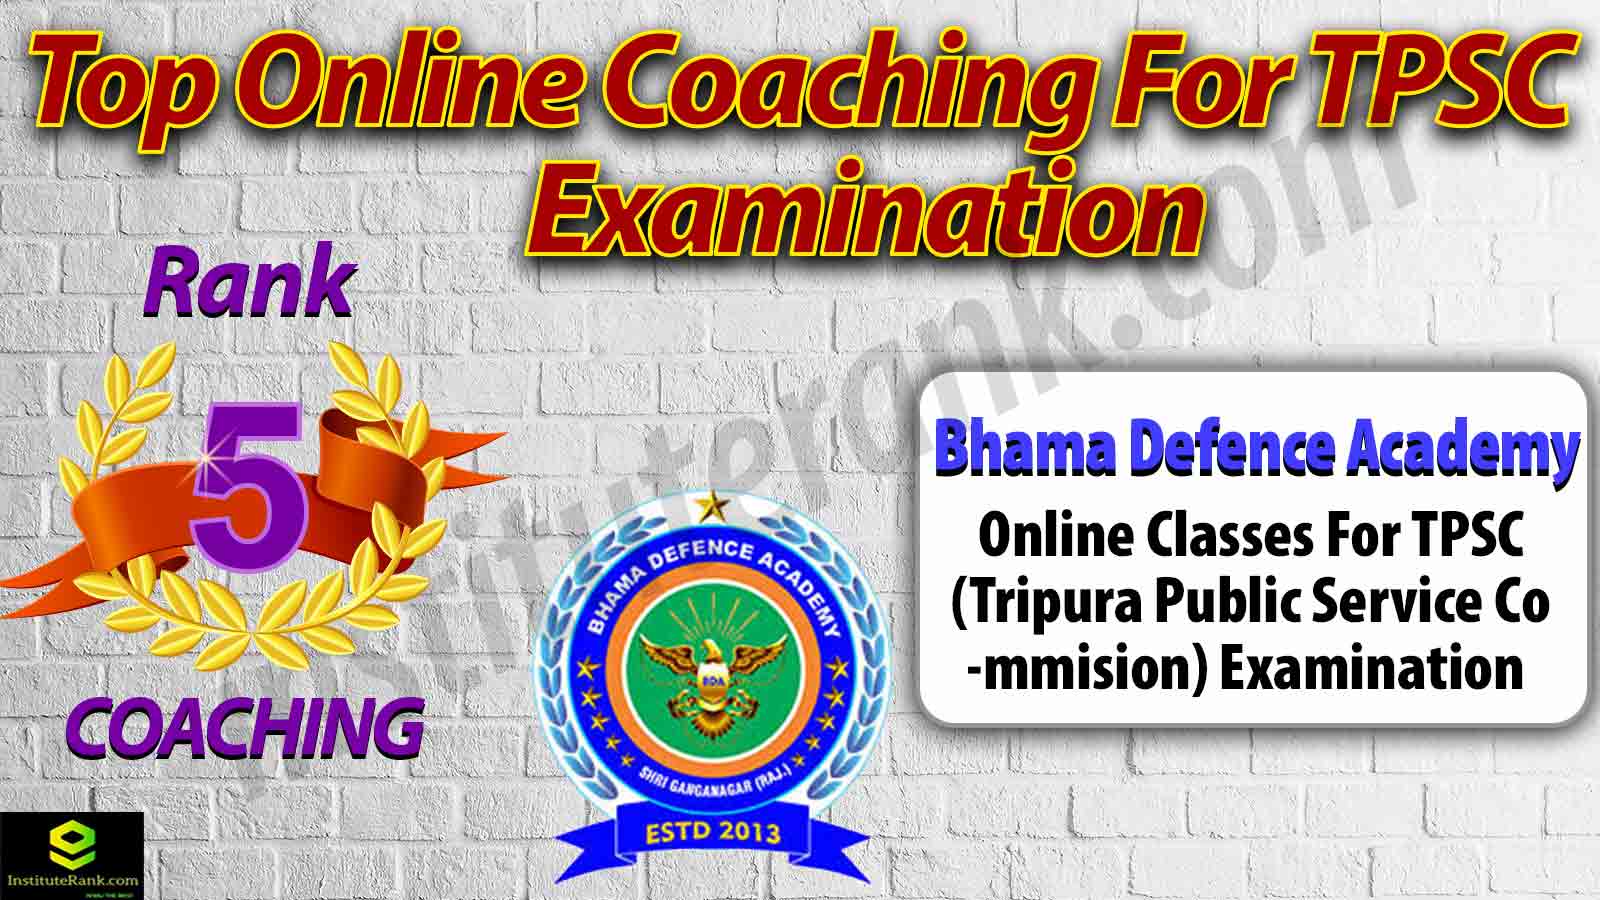 Top Online Coaching Centre for TPSC Examination